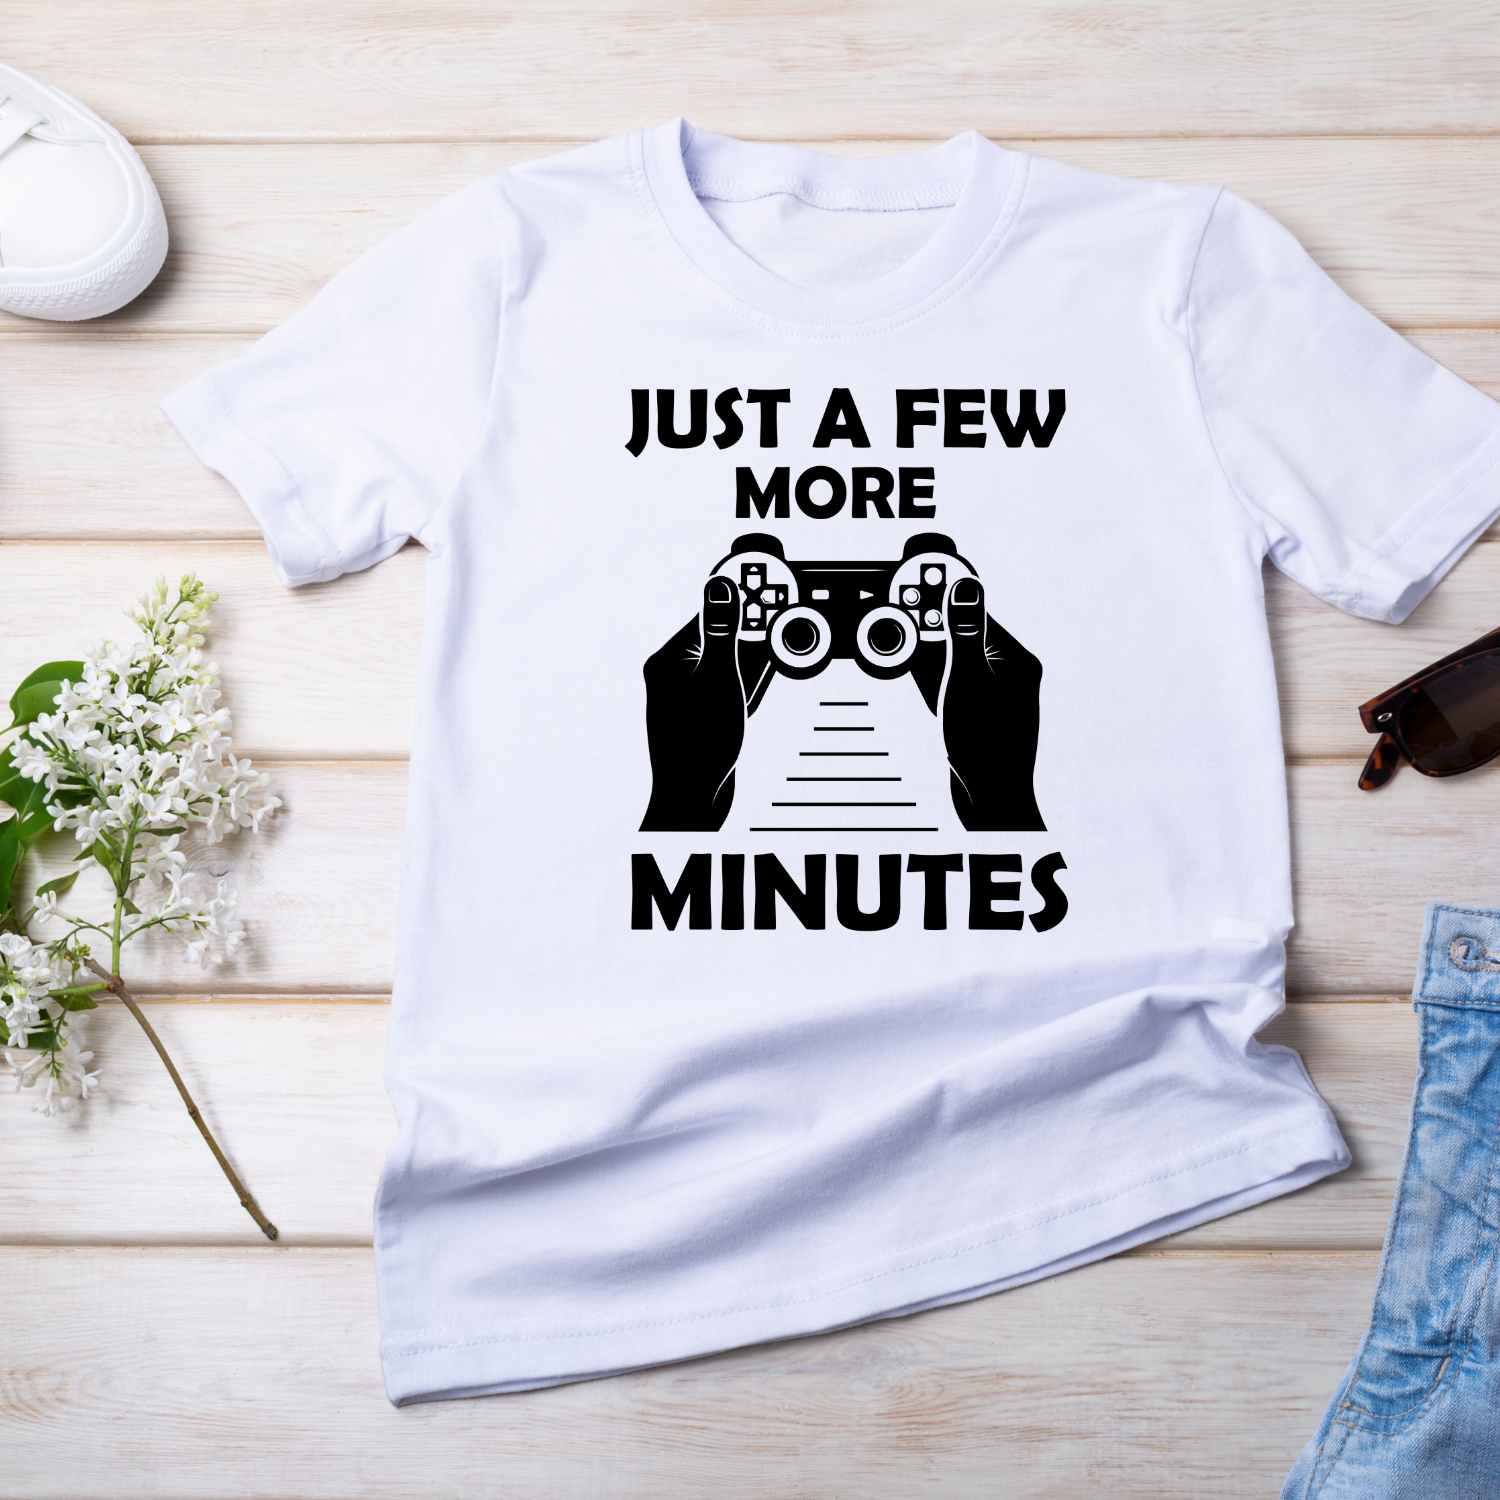 "Gear up for gaming with our 'Just a Few More Minutes' t-shirt design. Don't wait, level up your style now! Go grab yours today!"